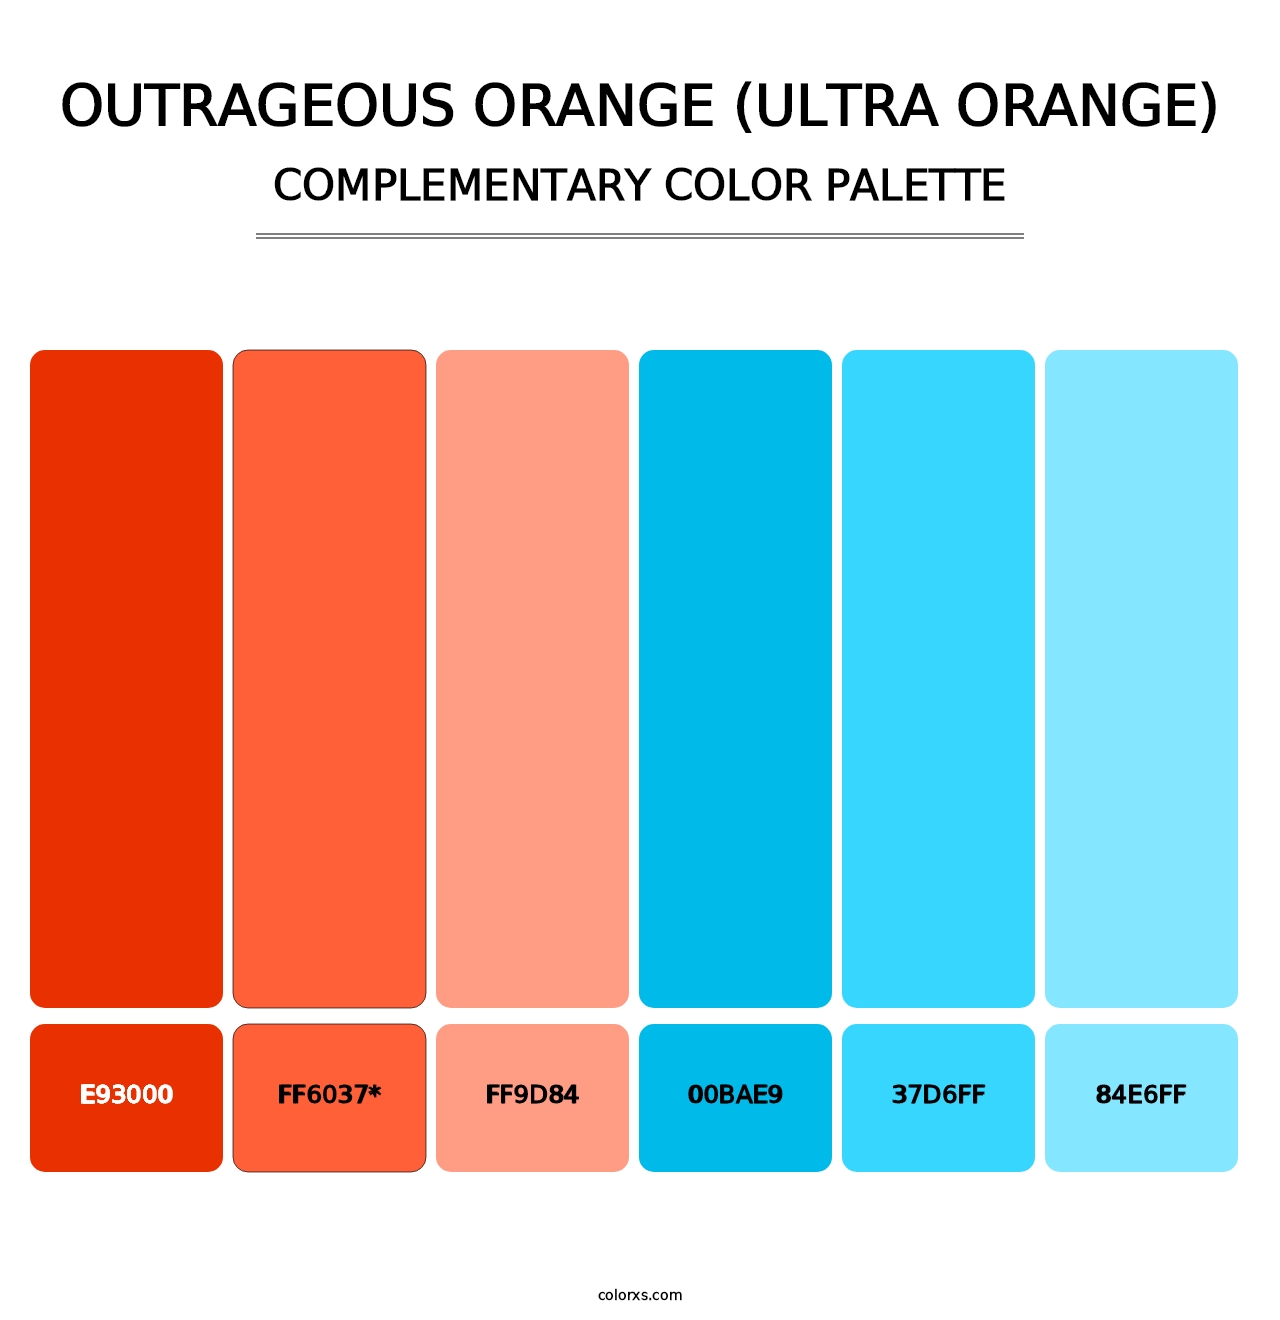 Outrageous Orange (Ultra Orange) - Complementary Color Palette